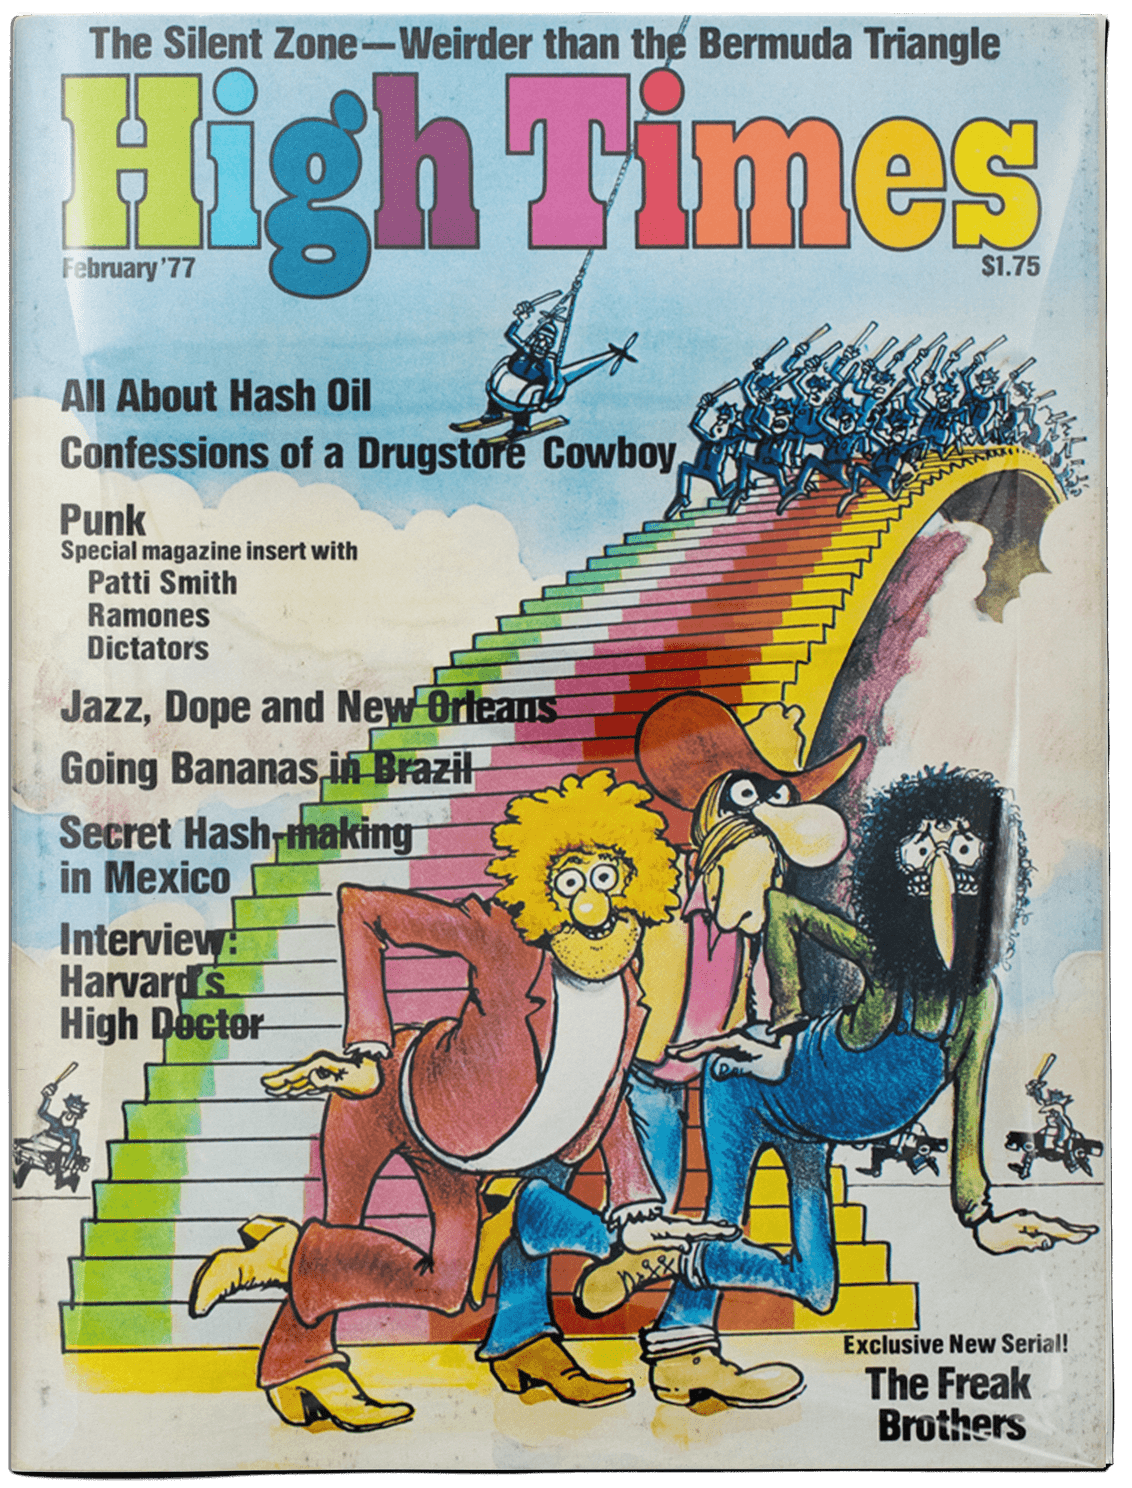 High Times featuring The Freak Brothers